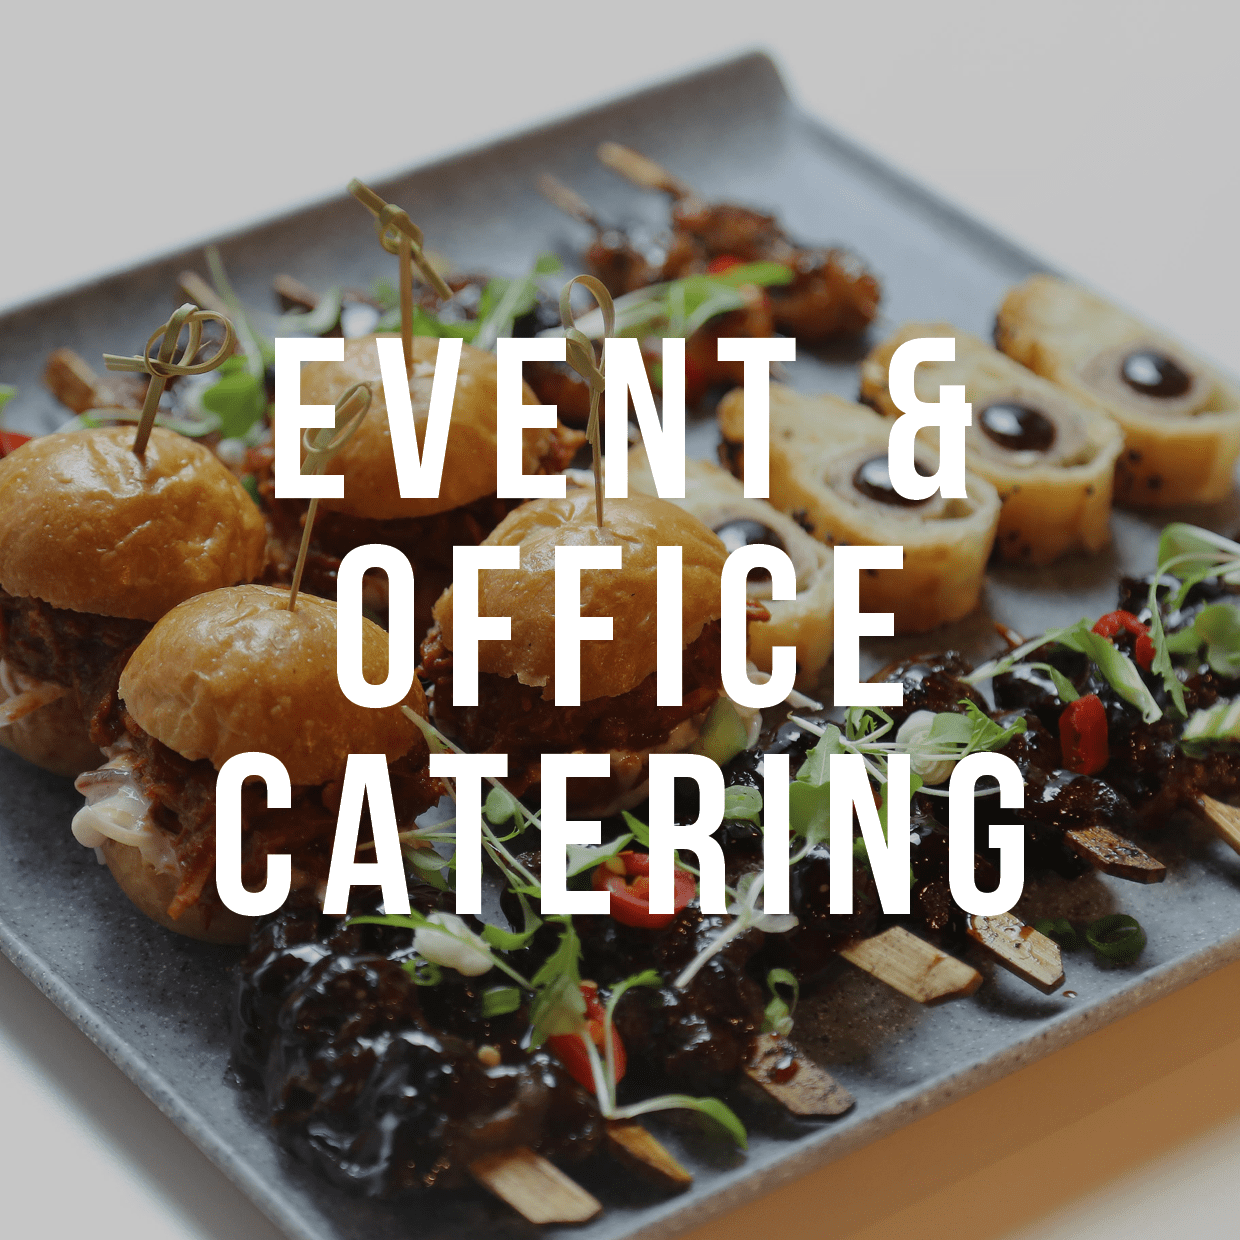 Image of food platter with text saying 'event & office catering'